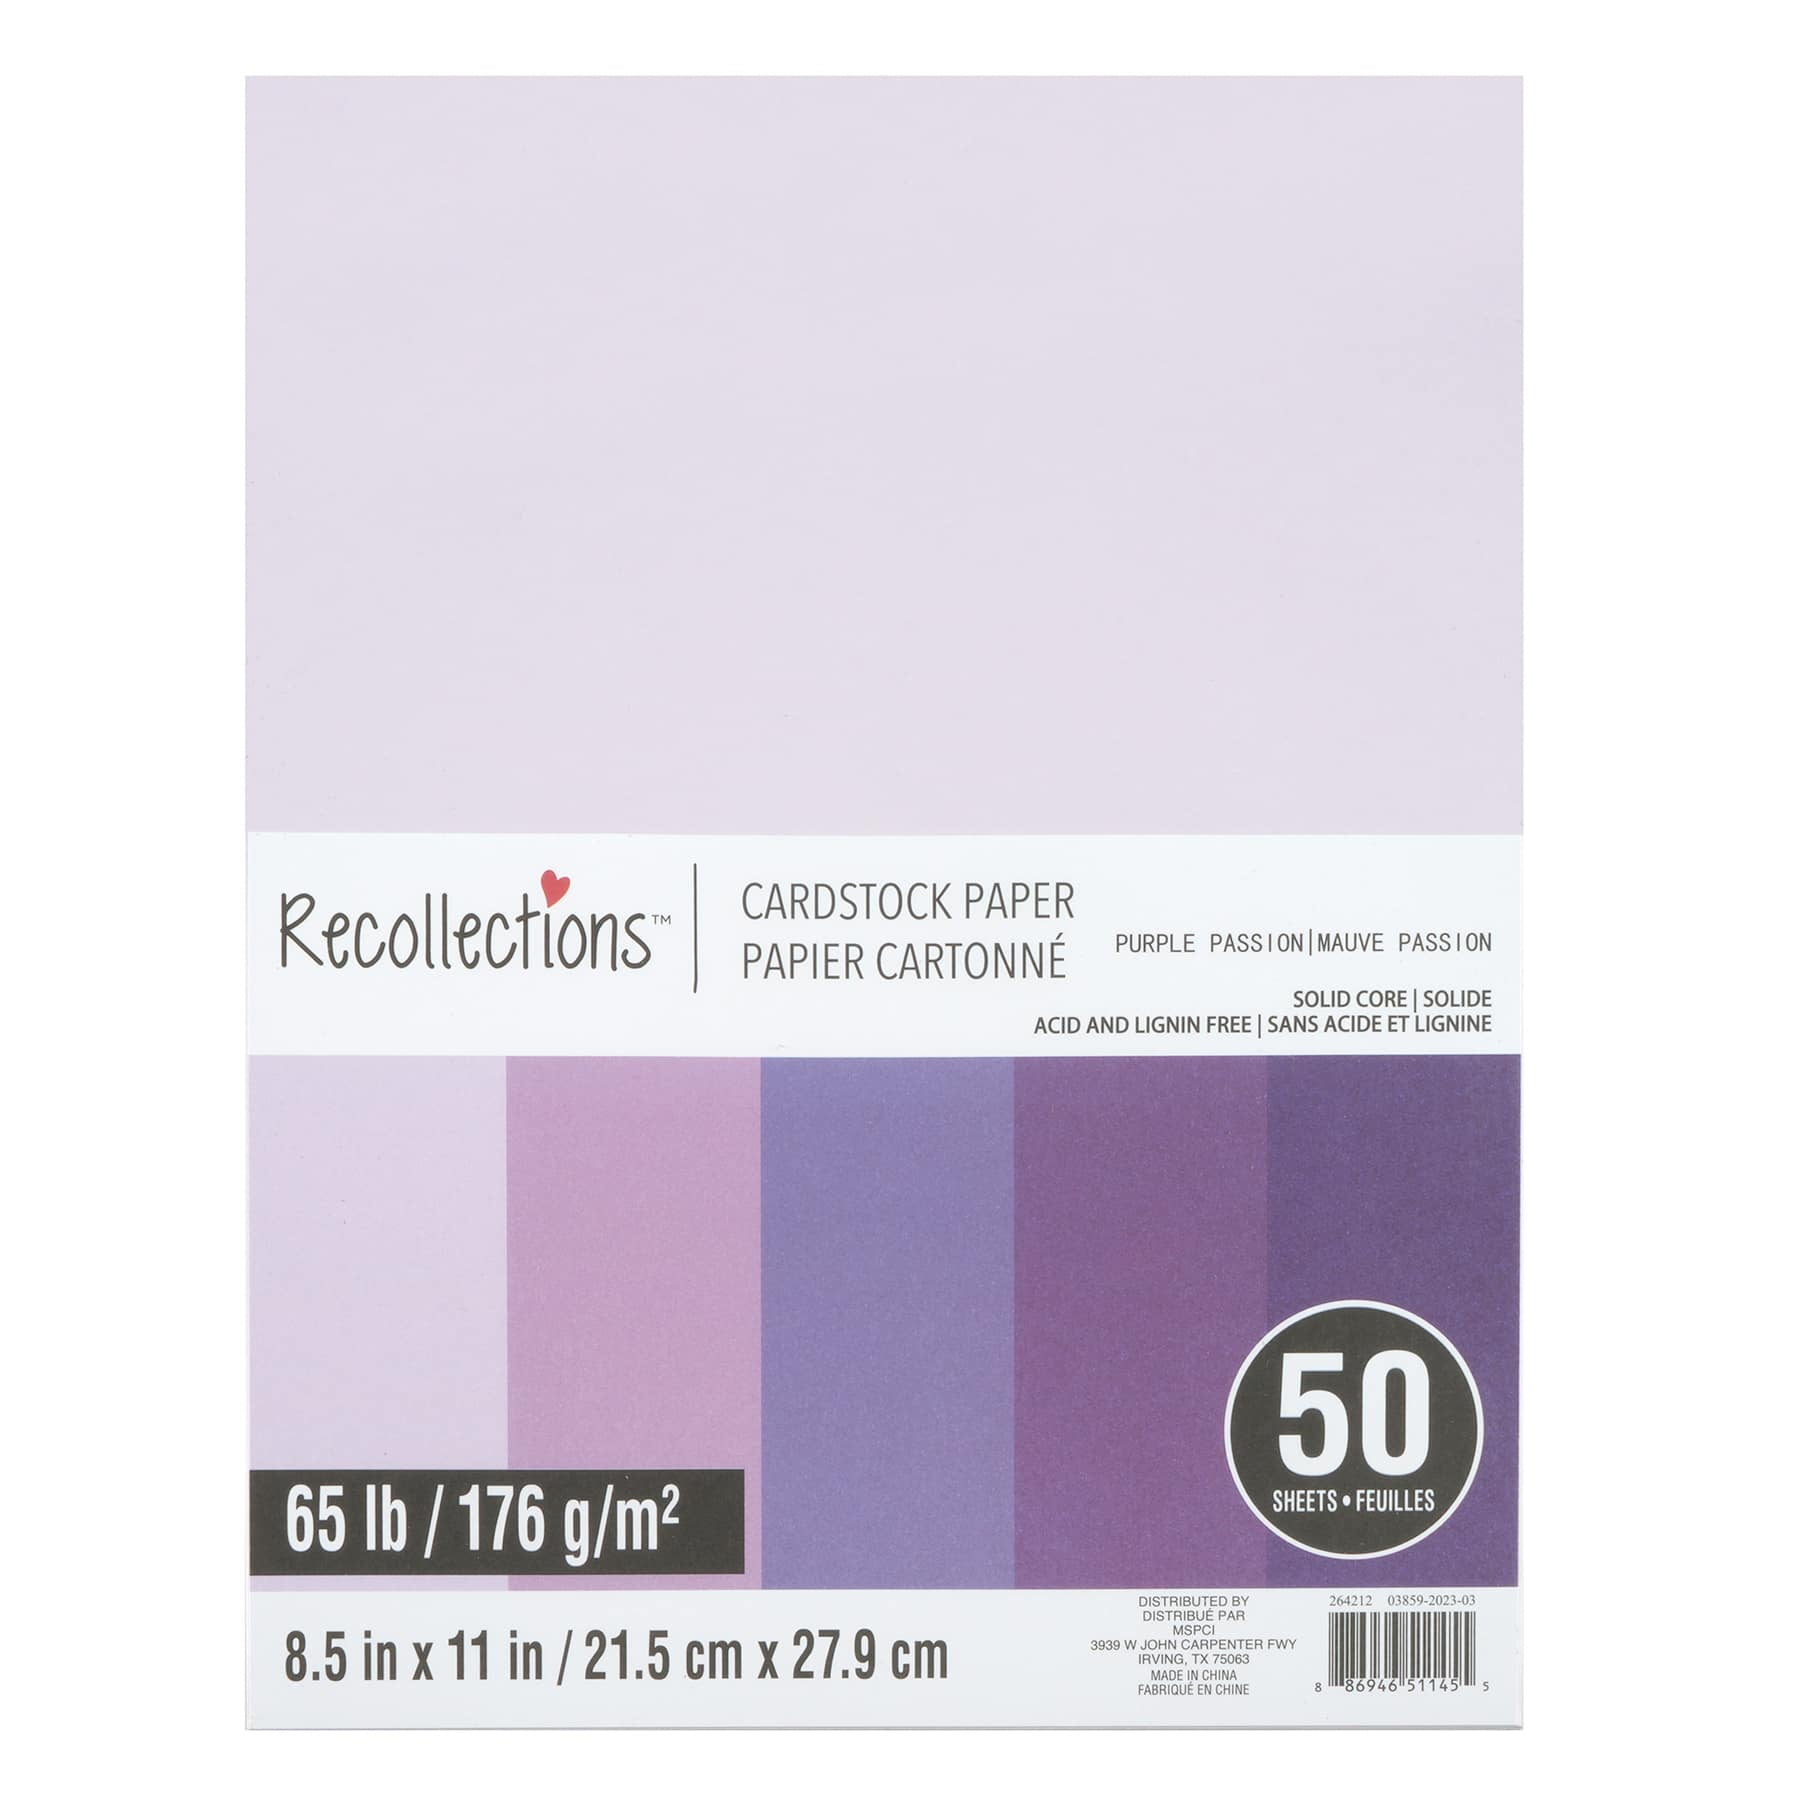 Black Shimmer 8.5 x 11 Cardstock Paper by Recollections™, 100 Sheets